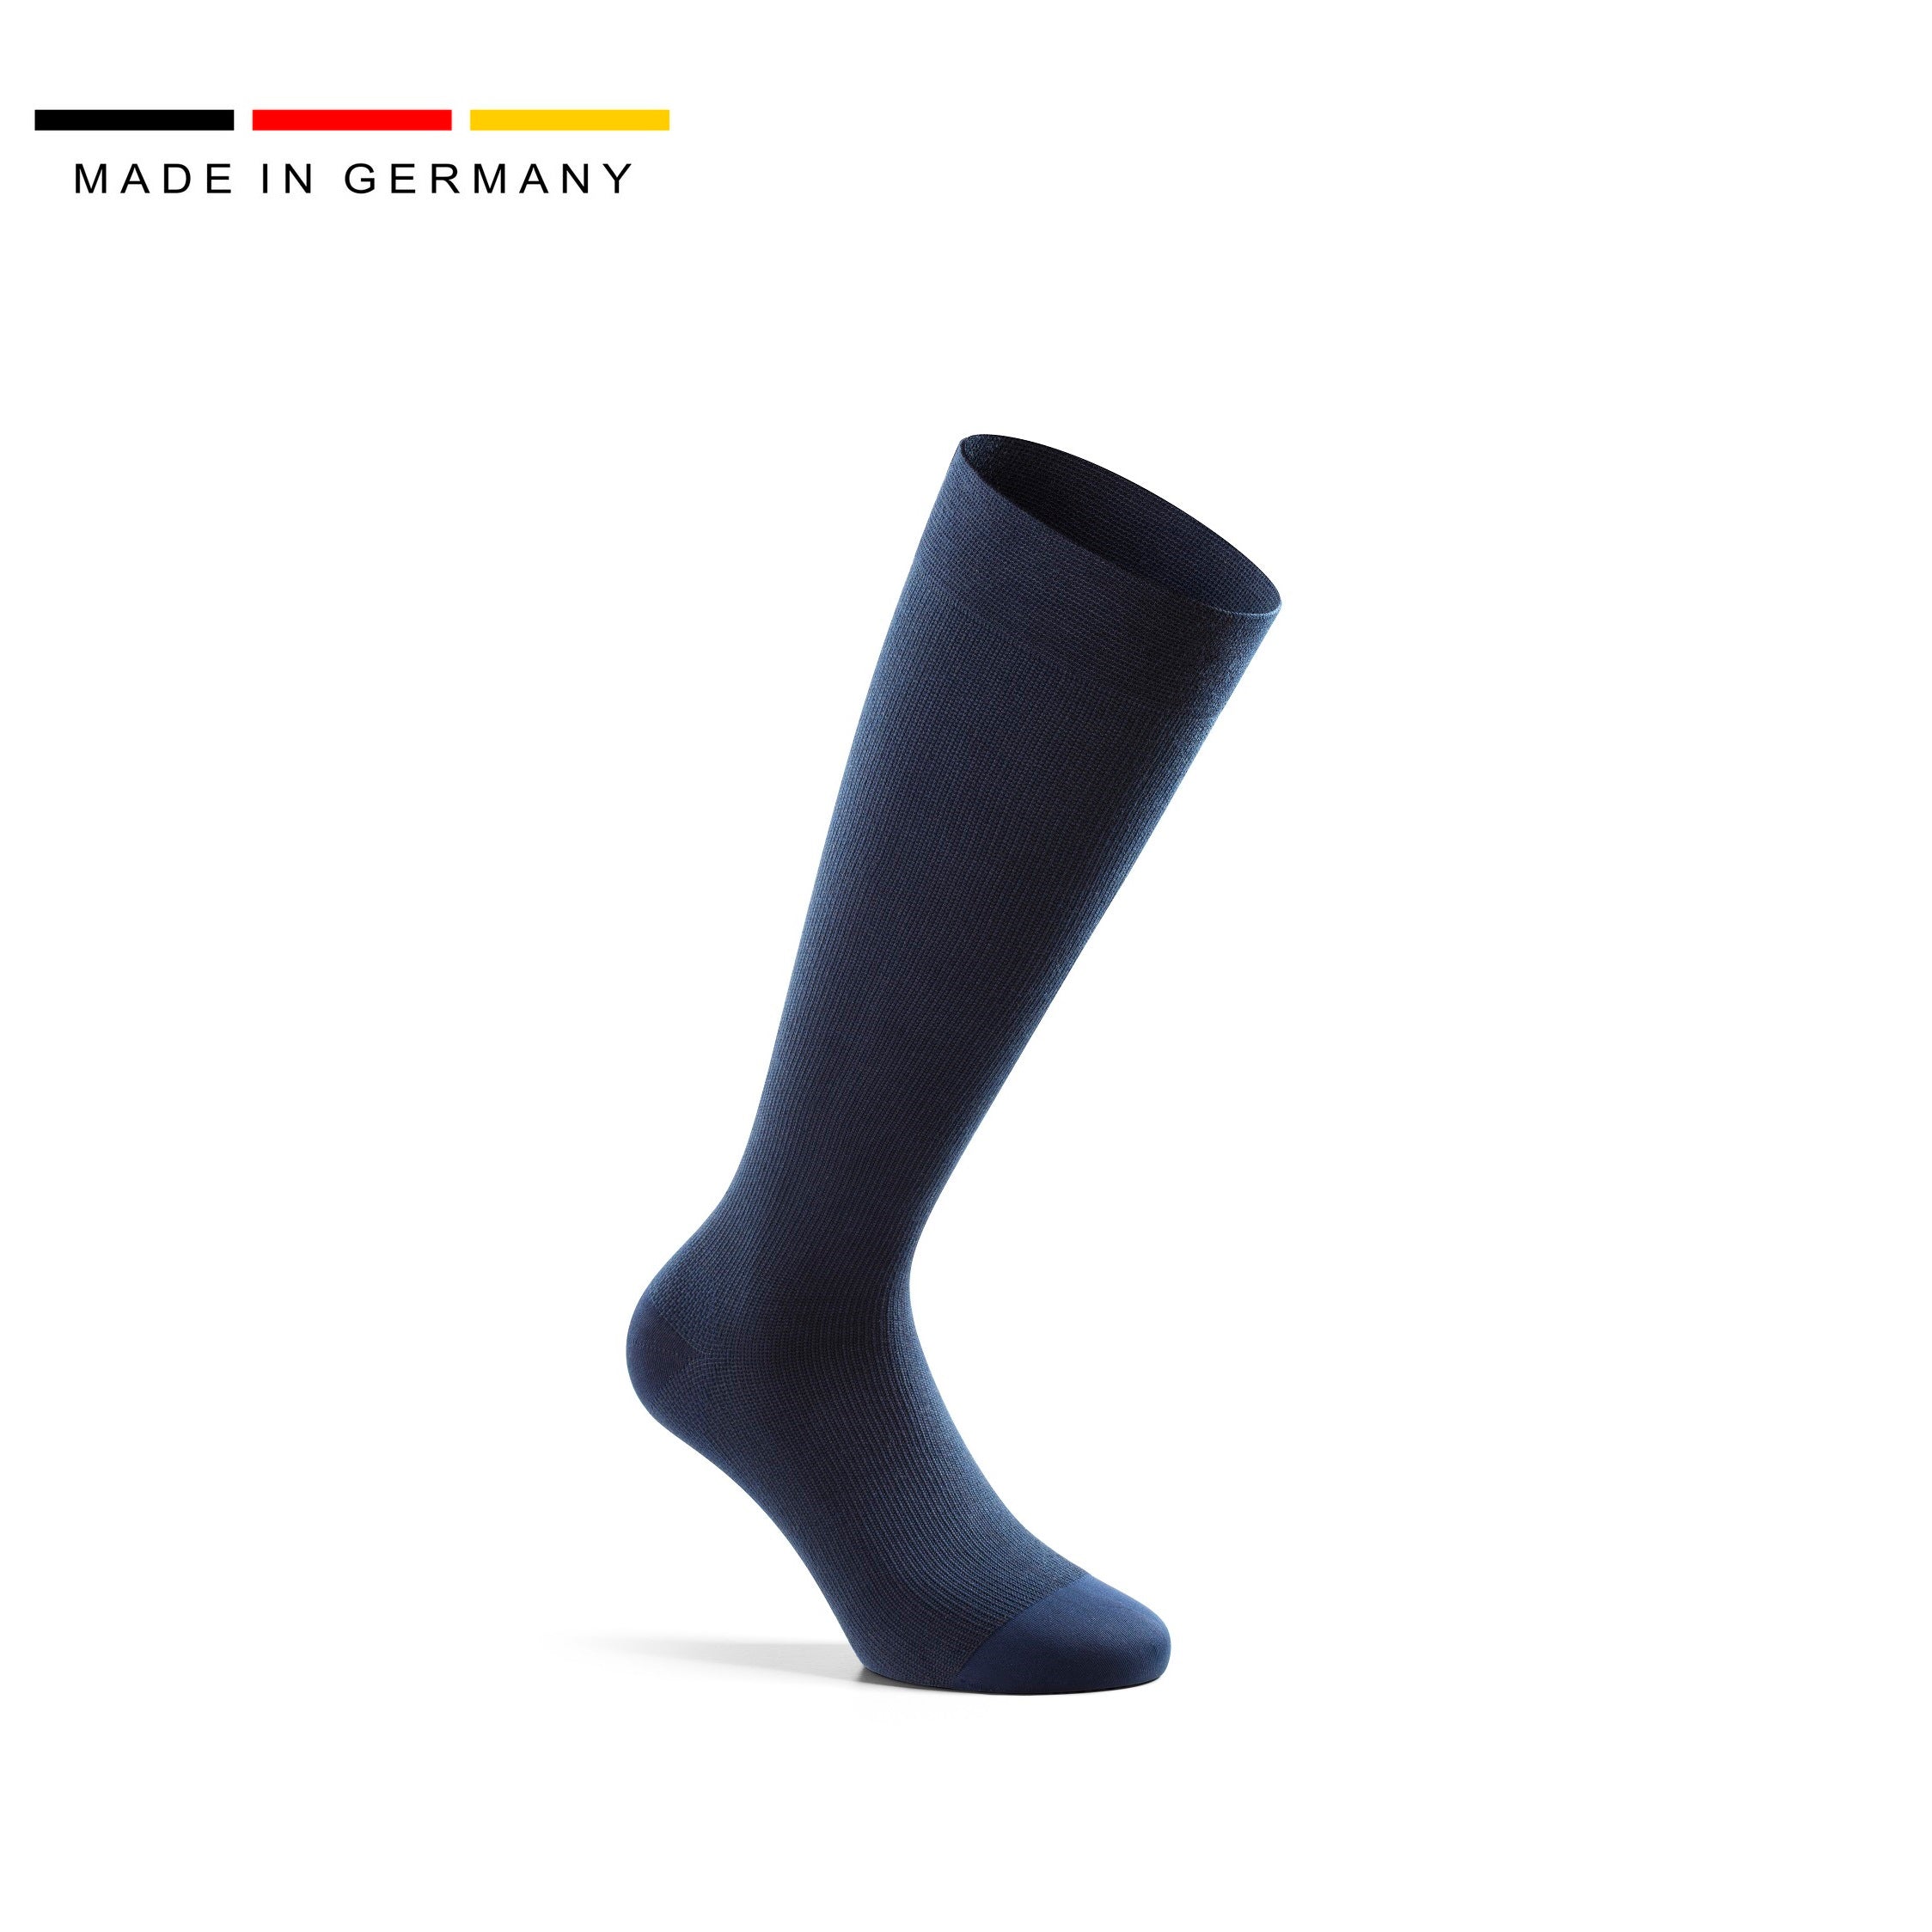 Memory men - Medical compression (20-30+ mmHg) - Navy Blue - physio supplies canada